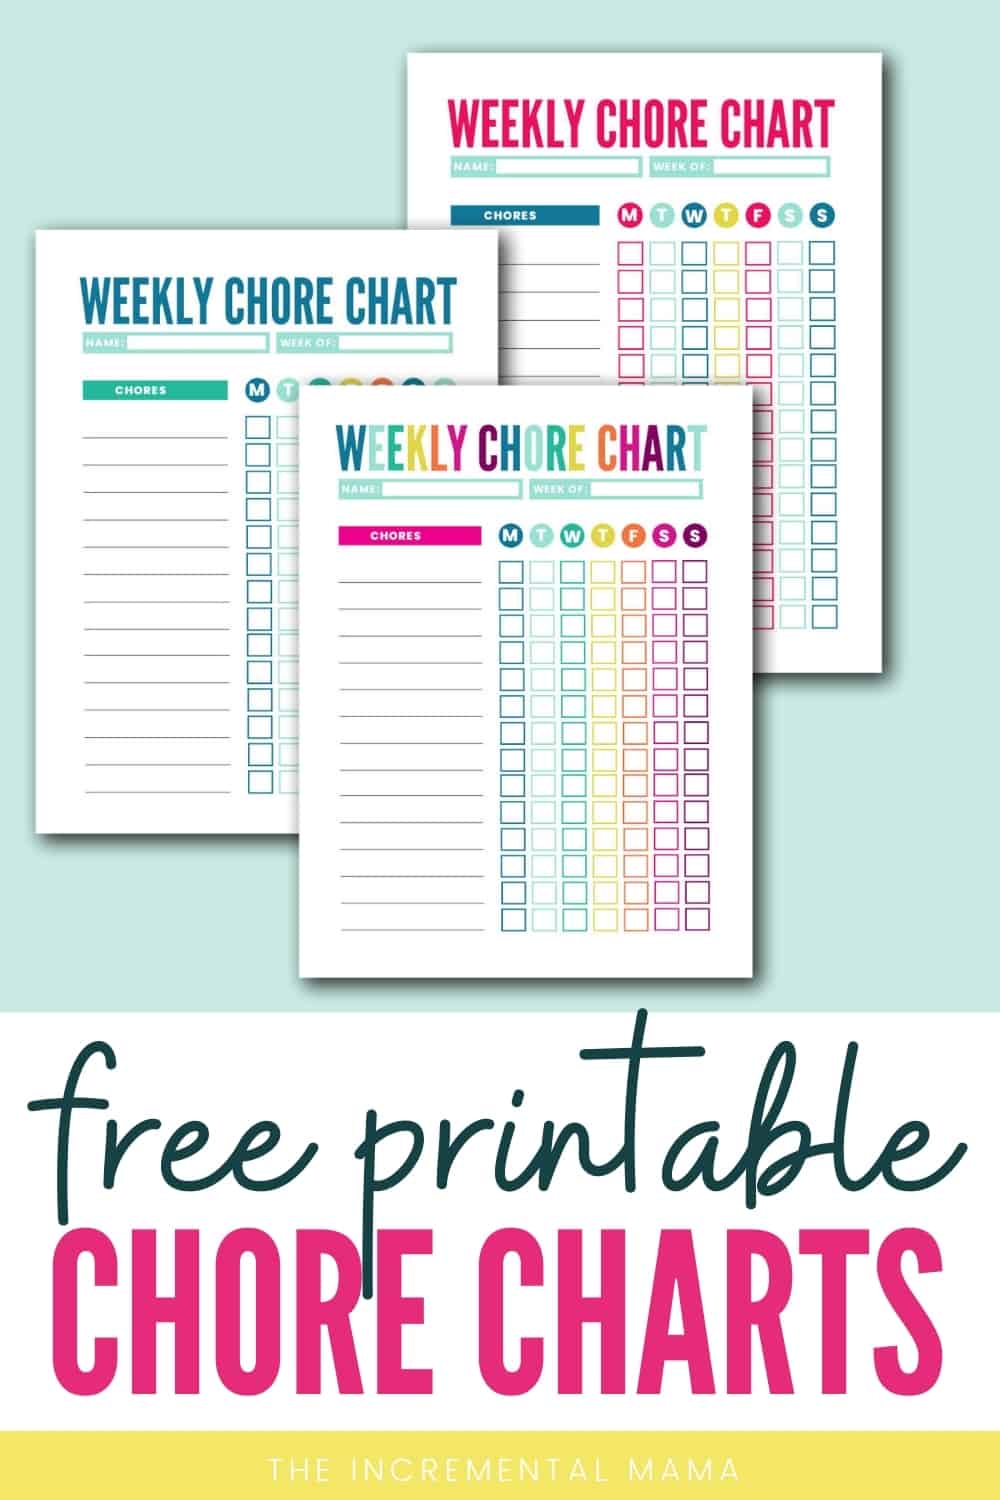 editable-chore-charts-for-multiple-children-daily-chore-charts